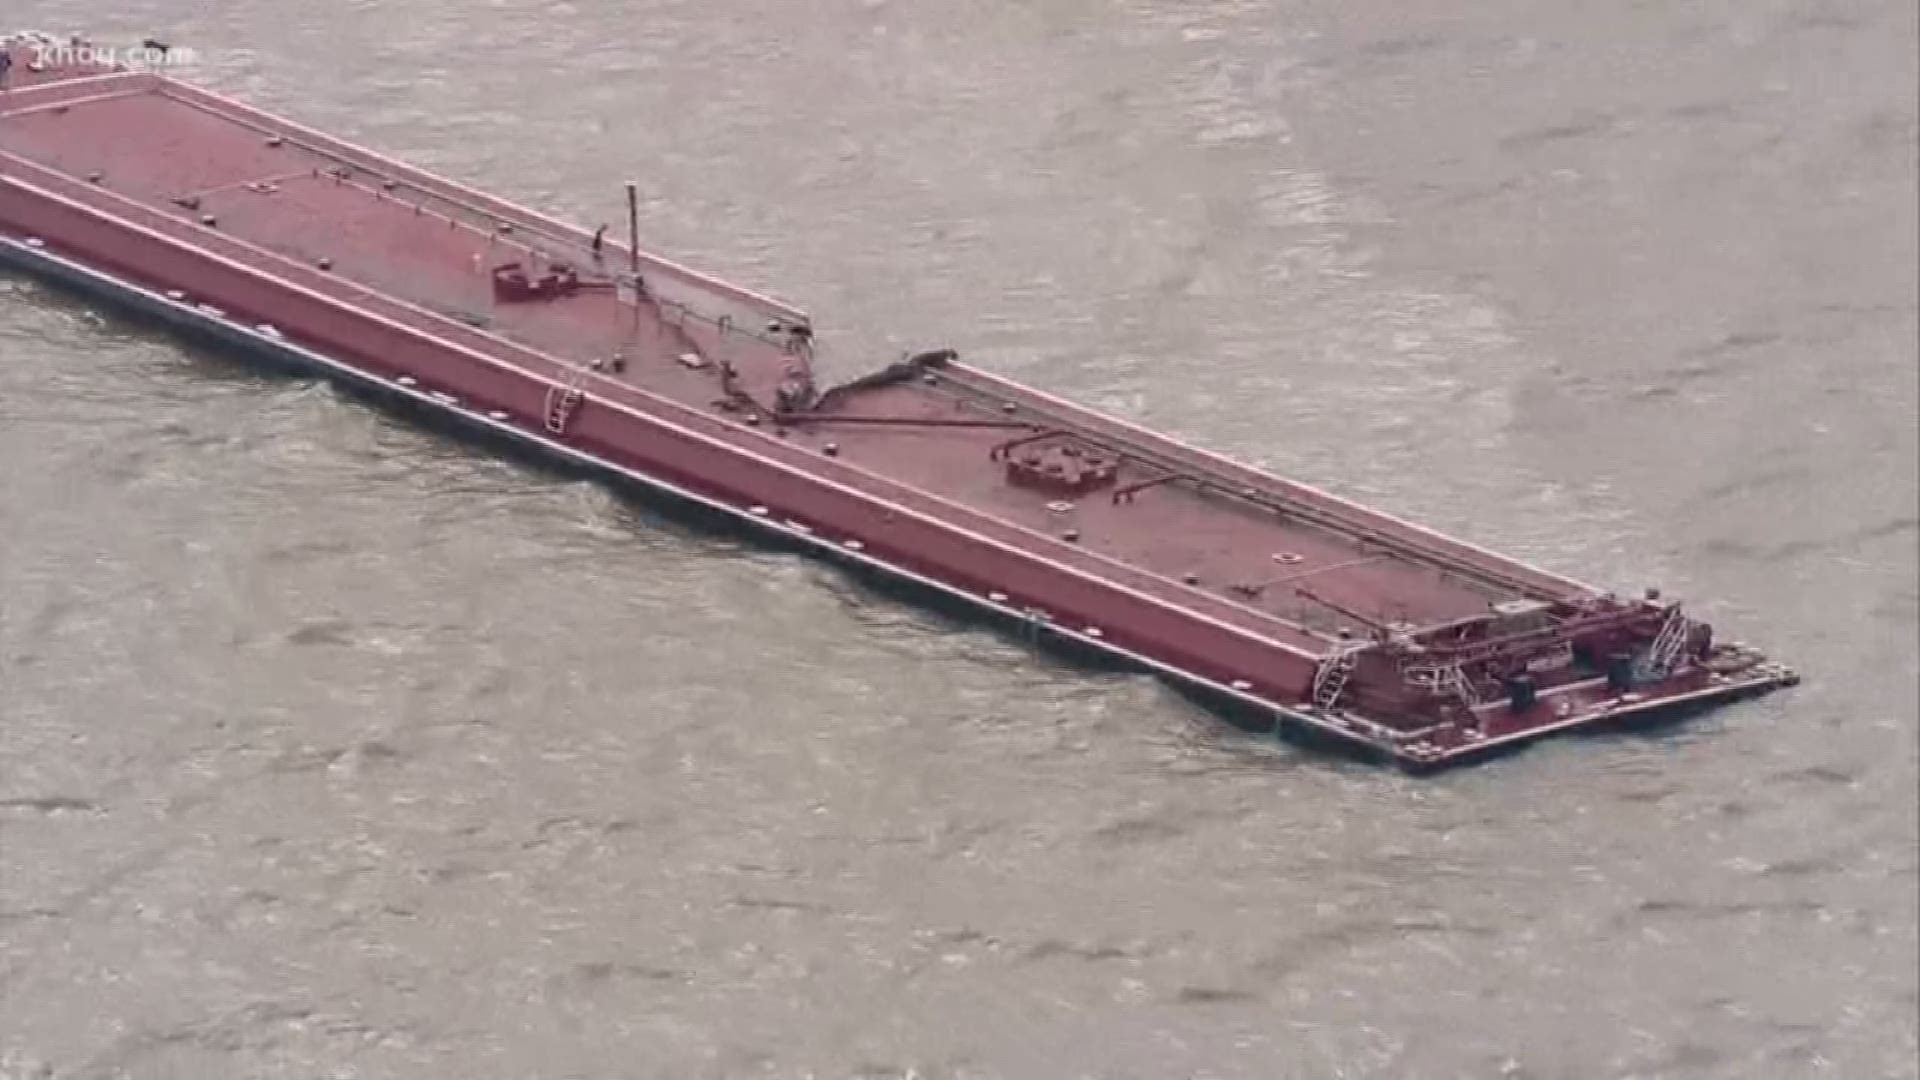 Two barges collided with a tanker south of Morgan's Point in the ship channel Friday afternoon.